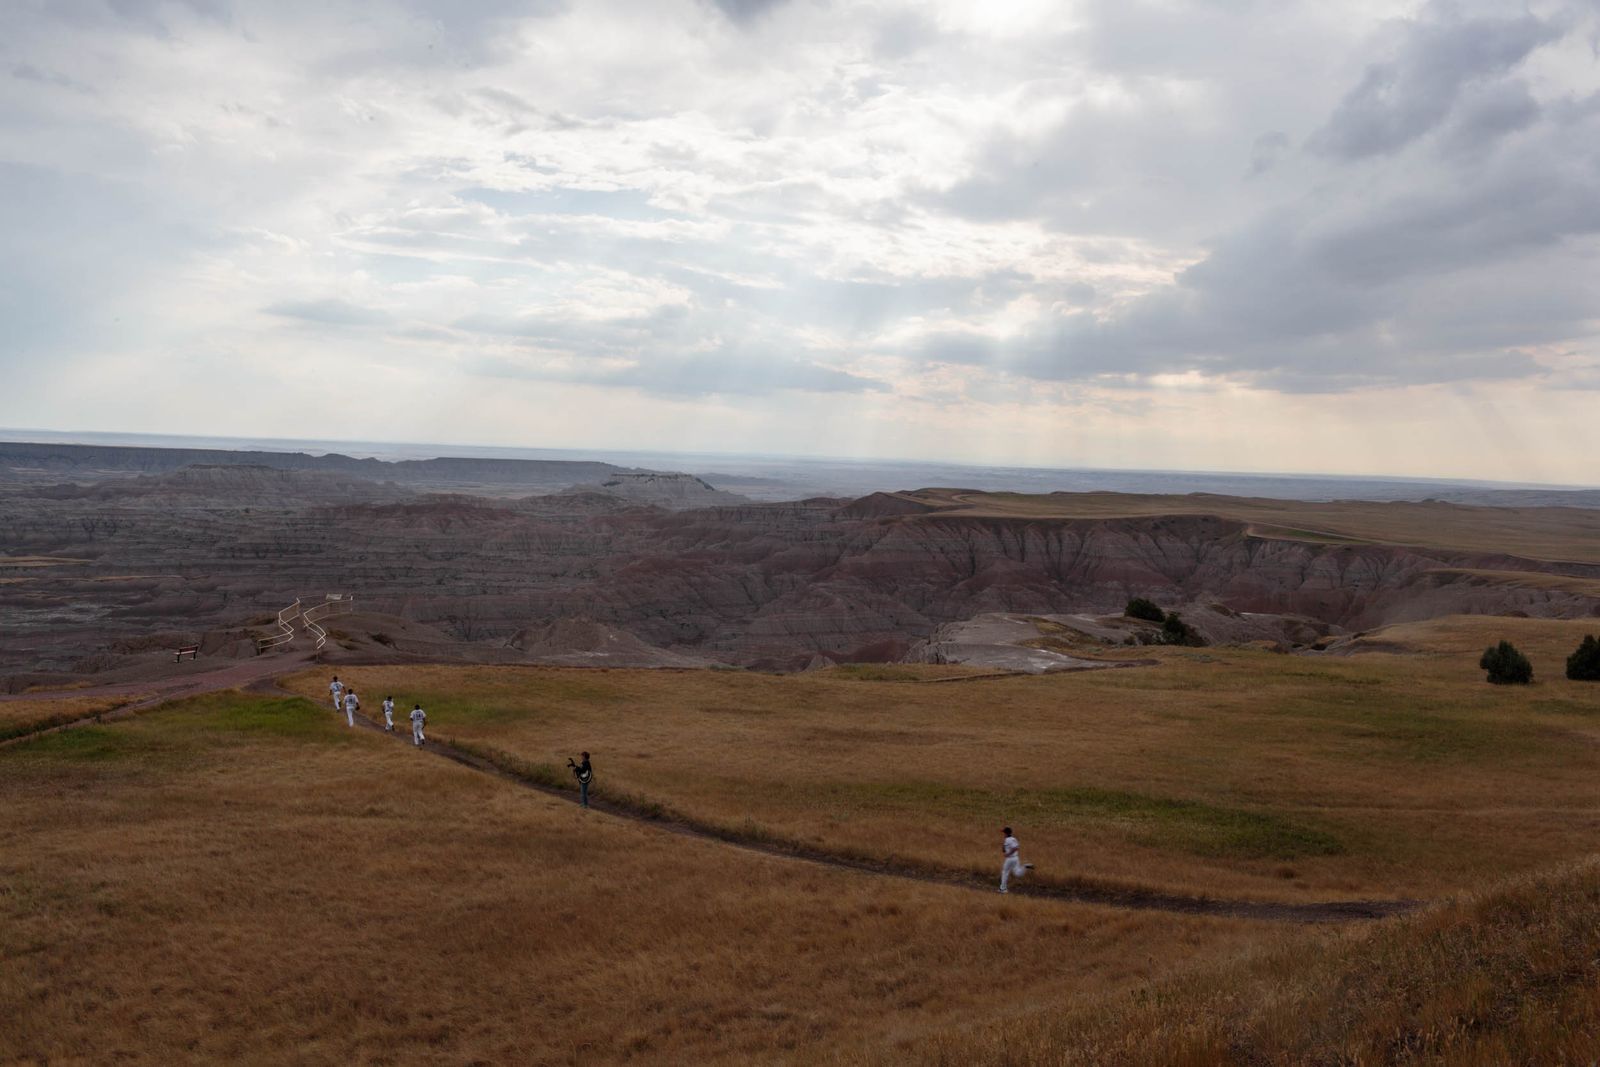 © Sarah Blesener - A local youth baseball team heads to have their group photo taken in the Badlands, South Dakota, 12 July 2017.